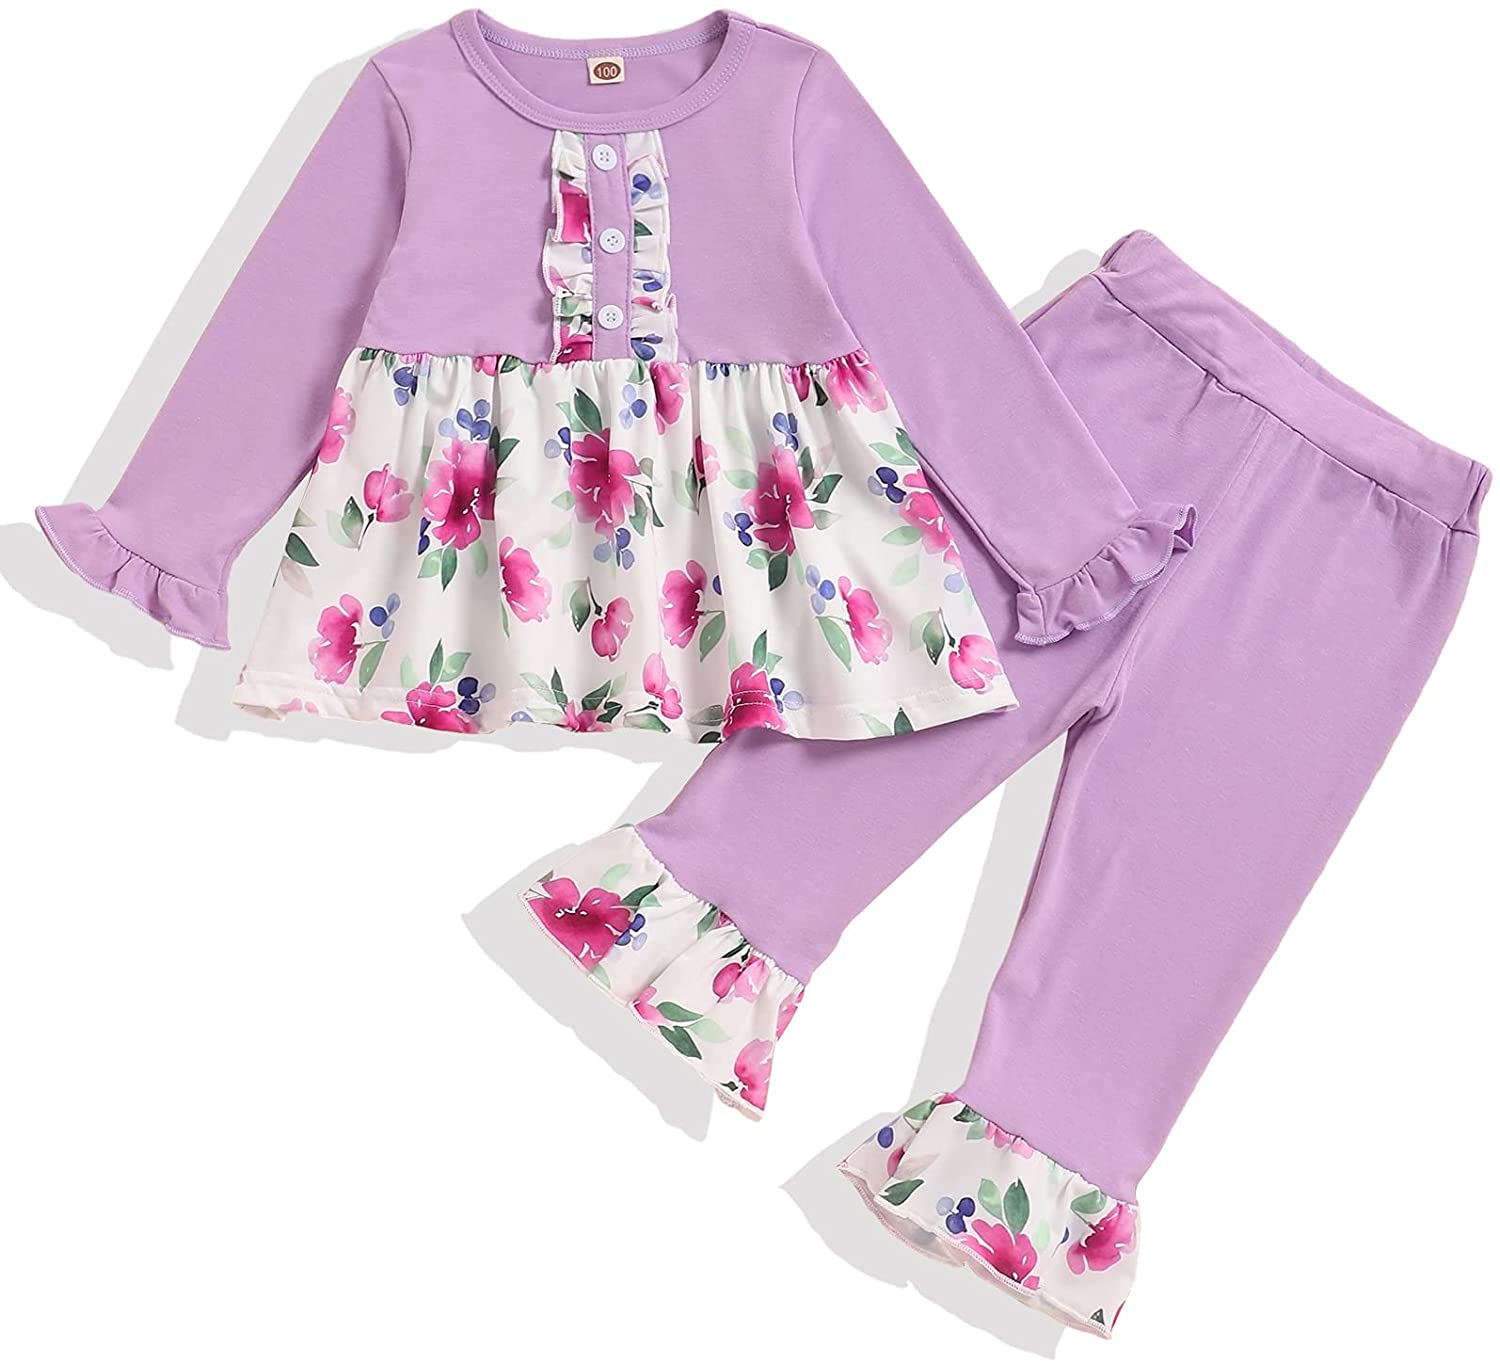 bilison Toddler Baby Girl Clothes Long Sleeve Ruffle Tops Floral Flare Pants Little Girls Fall Winter Outfit Set 